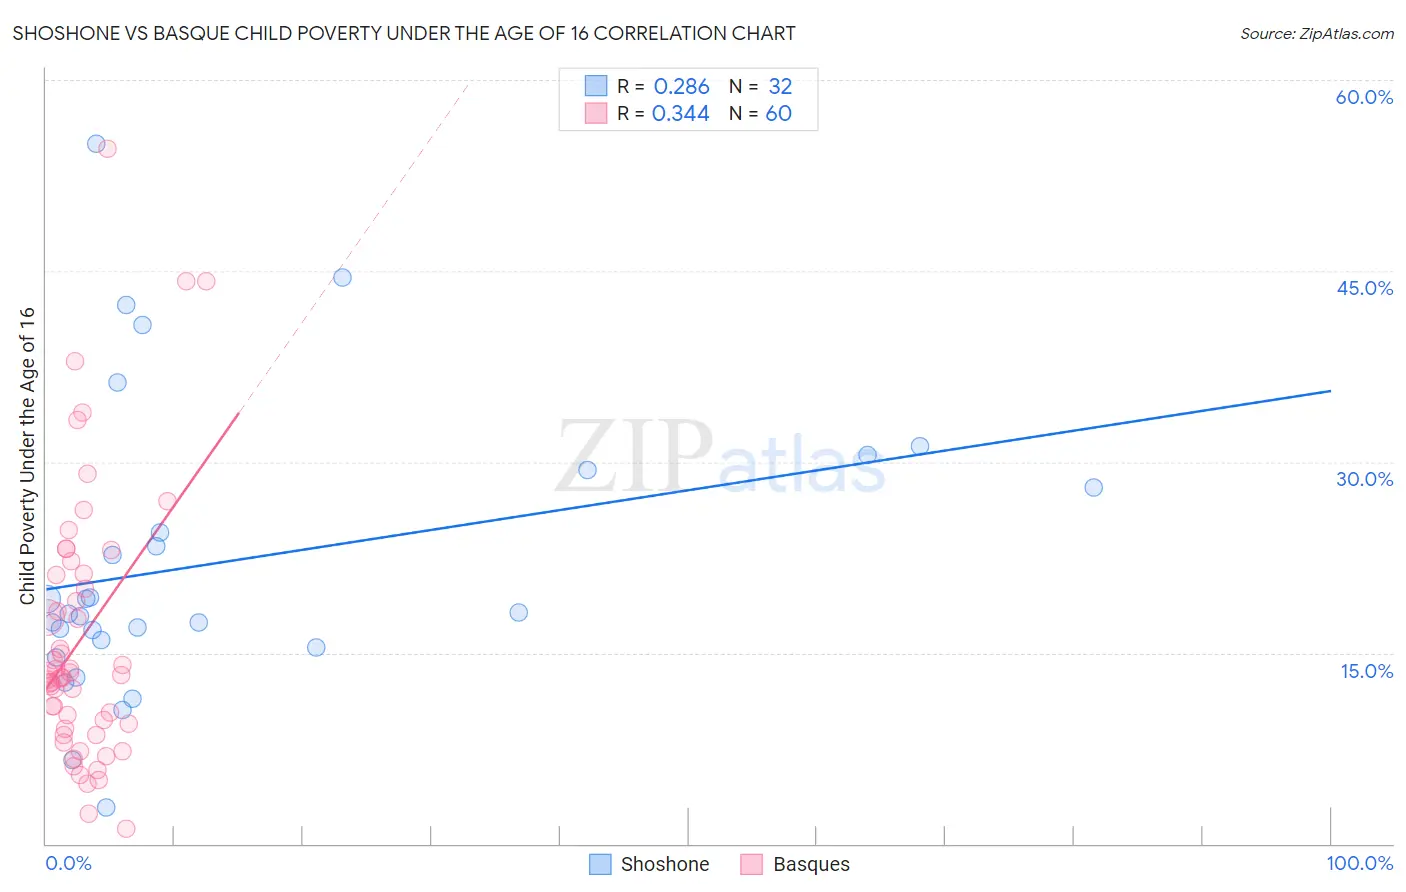 Shoshone vs Basque Child Poverty Under the Age of 16